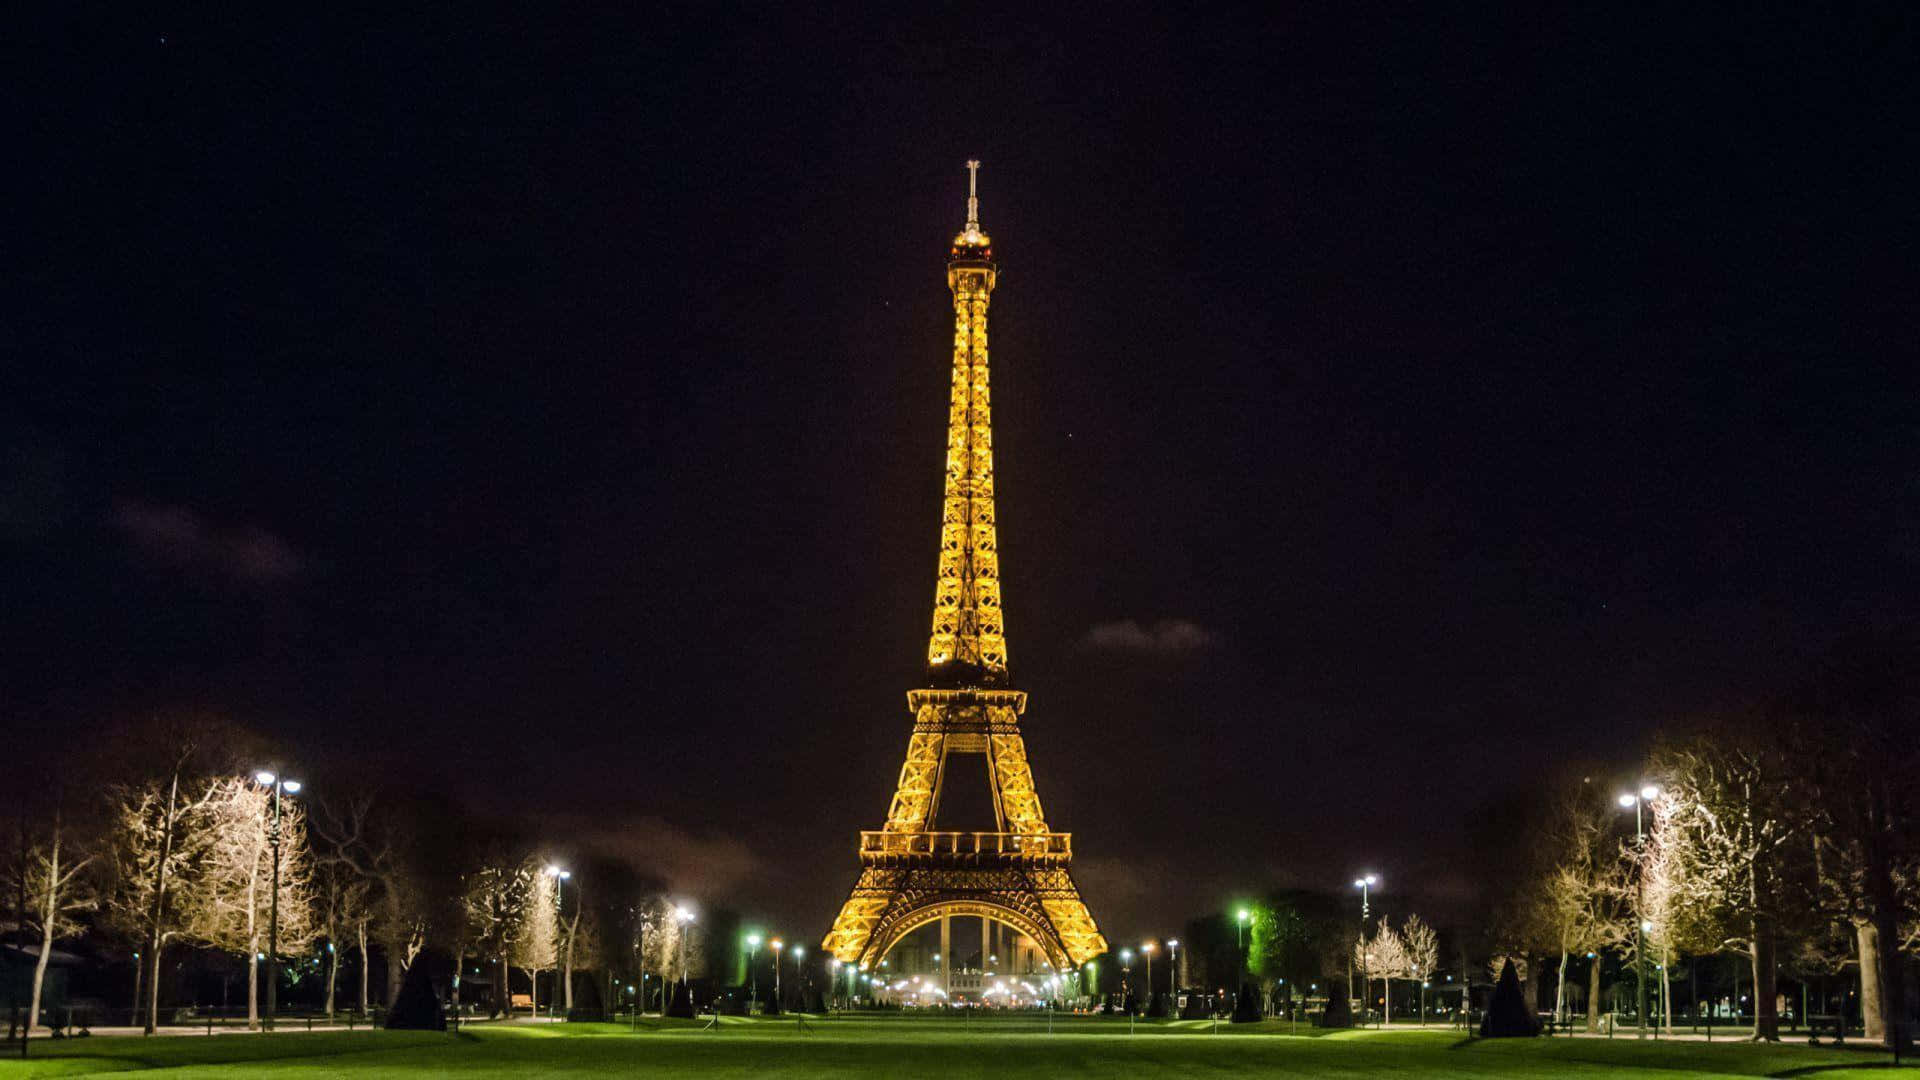 The Eiffel Tower stands tall against the Paris Skyline